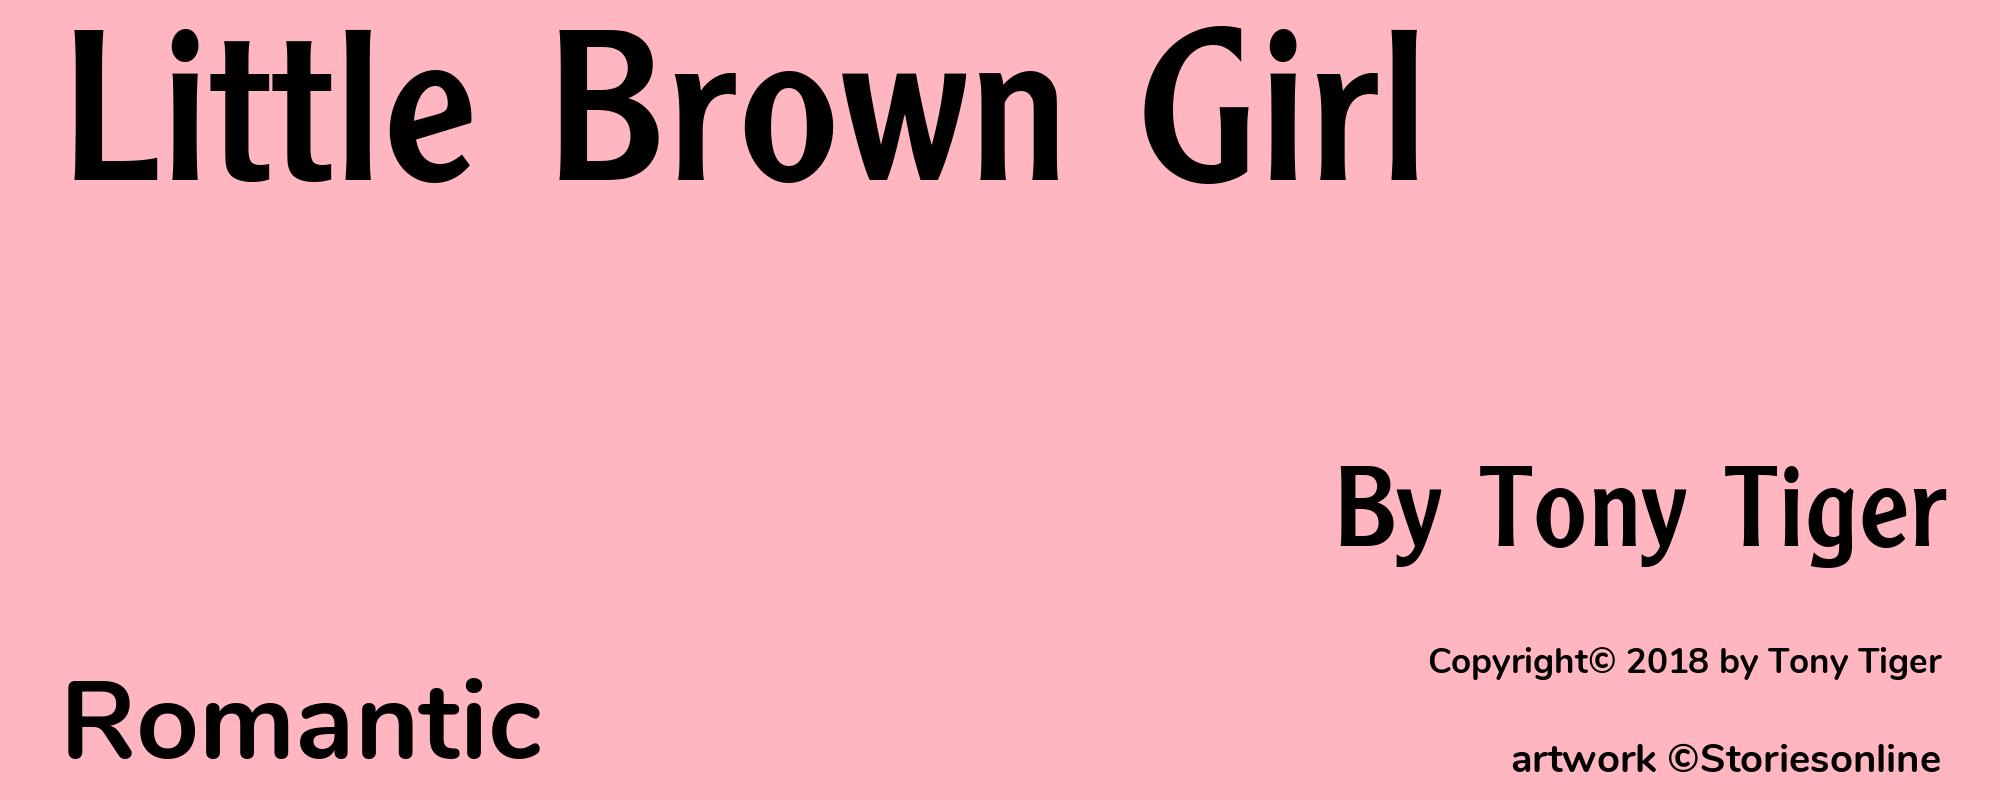 Little Brown Girl - Cover